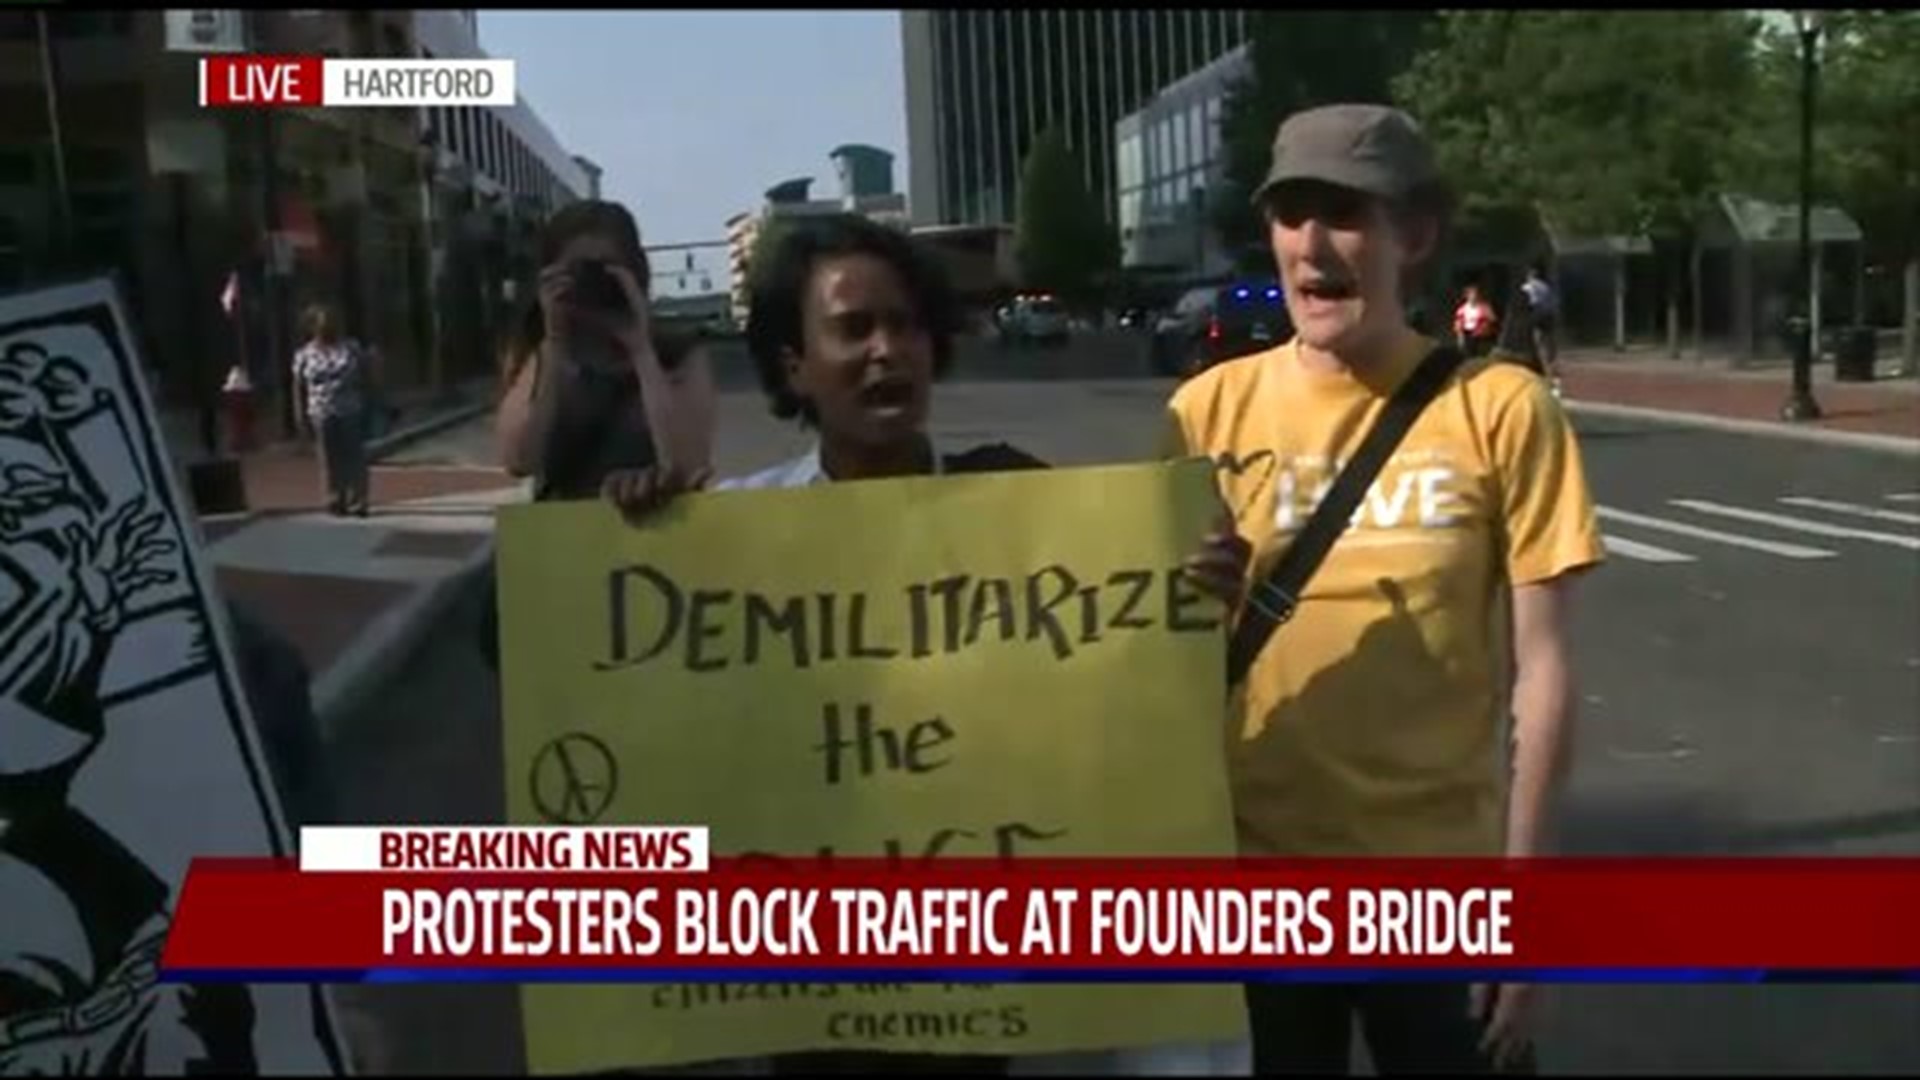 Chaos in Hartford as protesters block traffic, are arrested